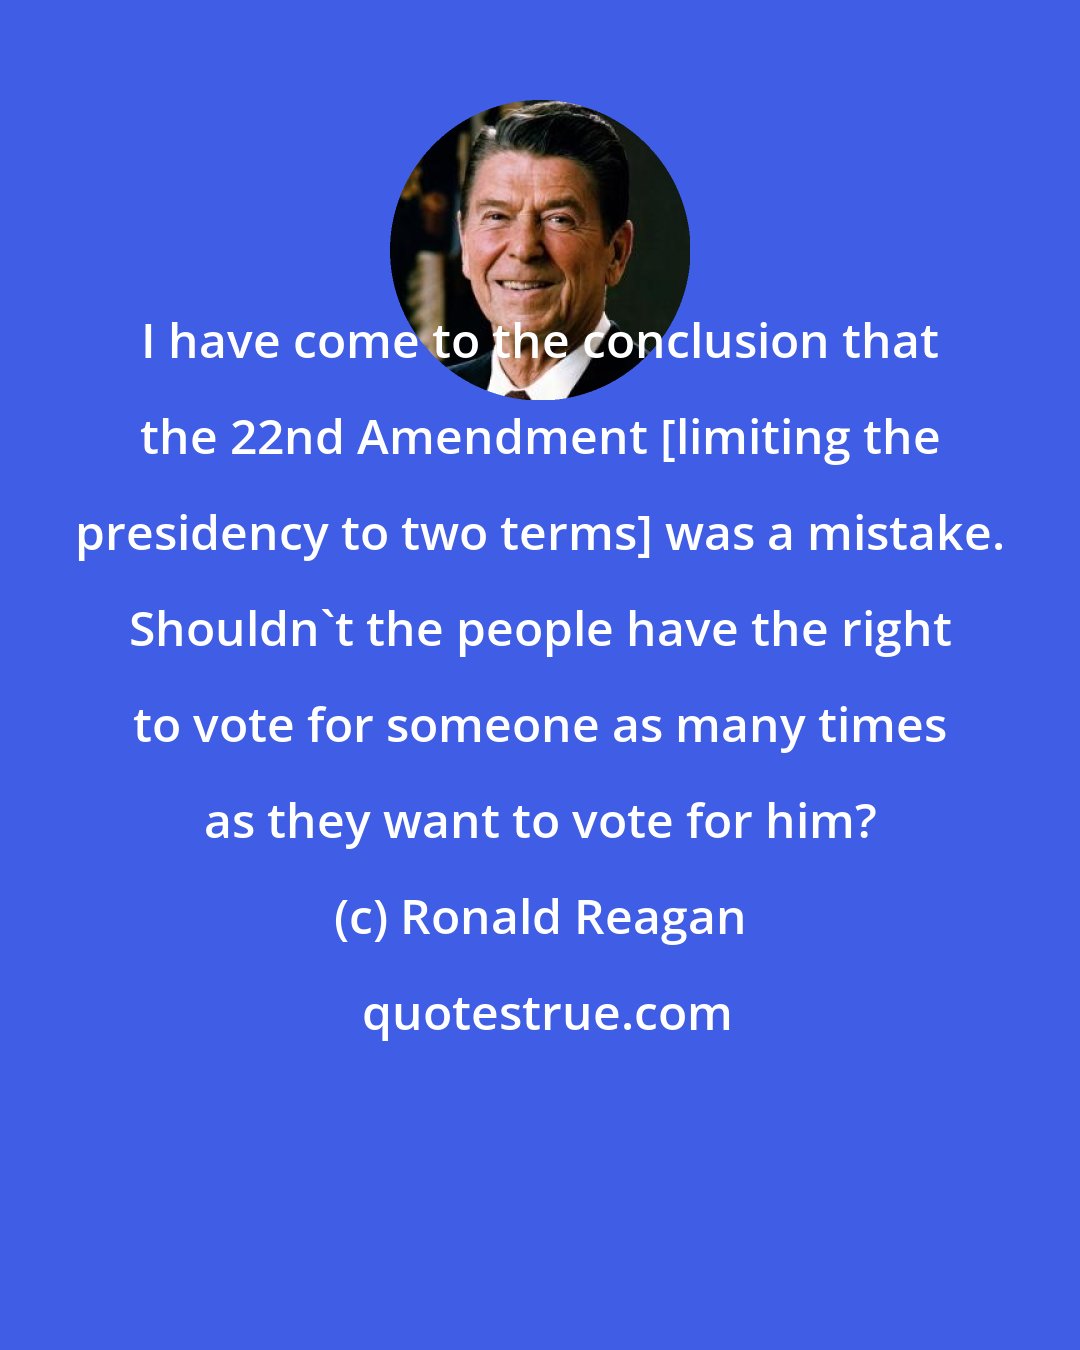 Ronald Reagan: I have come to the conclusion that the 22nd Amendment [limiting the presidency to two terms] was a mistake. Shouldn't the people have the right to vote for someone as many times as they want to vote for him?